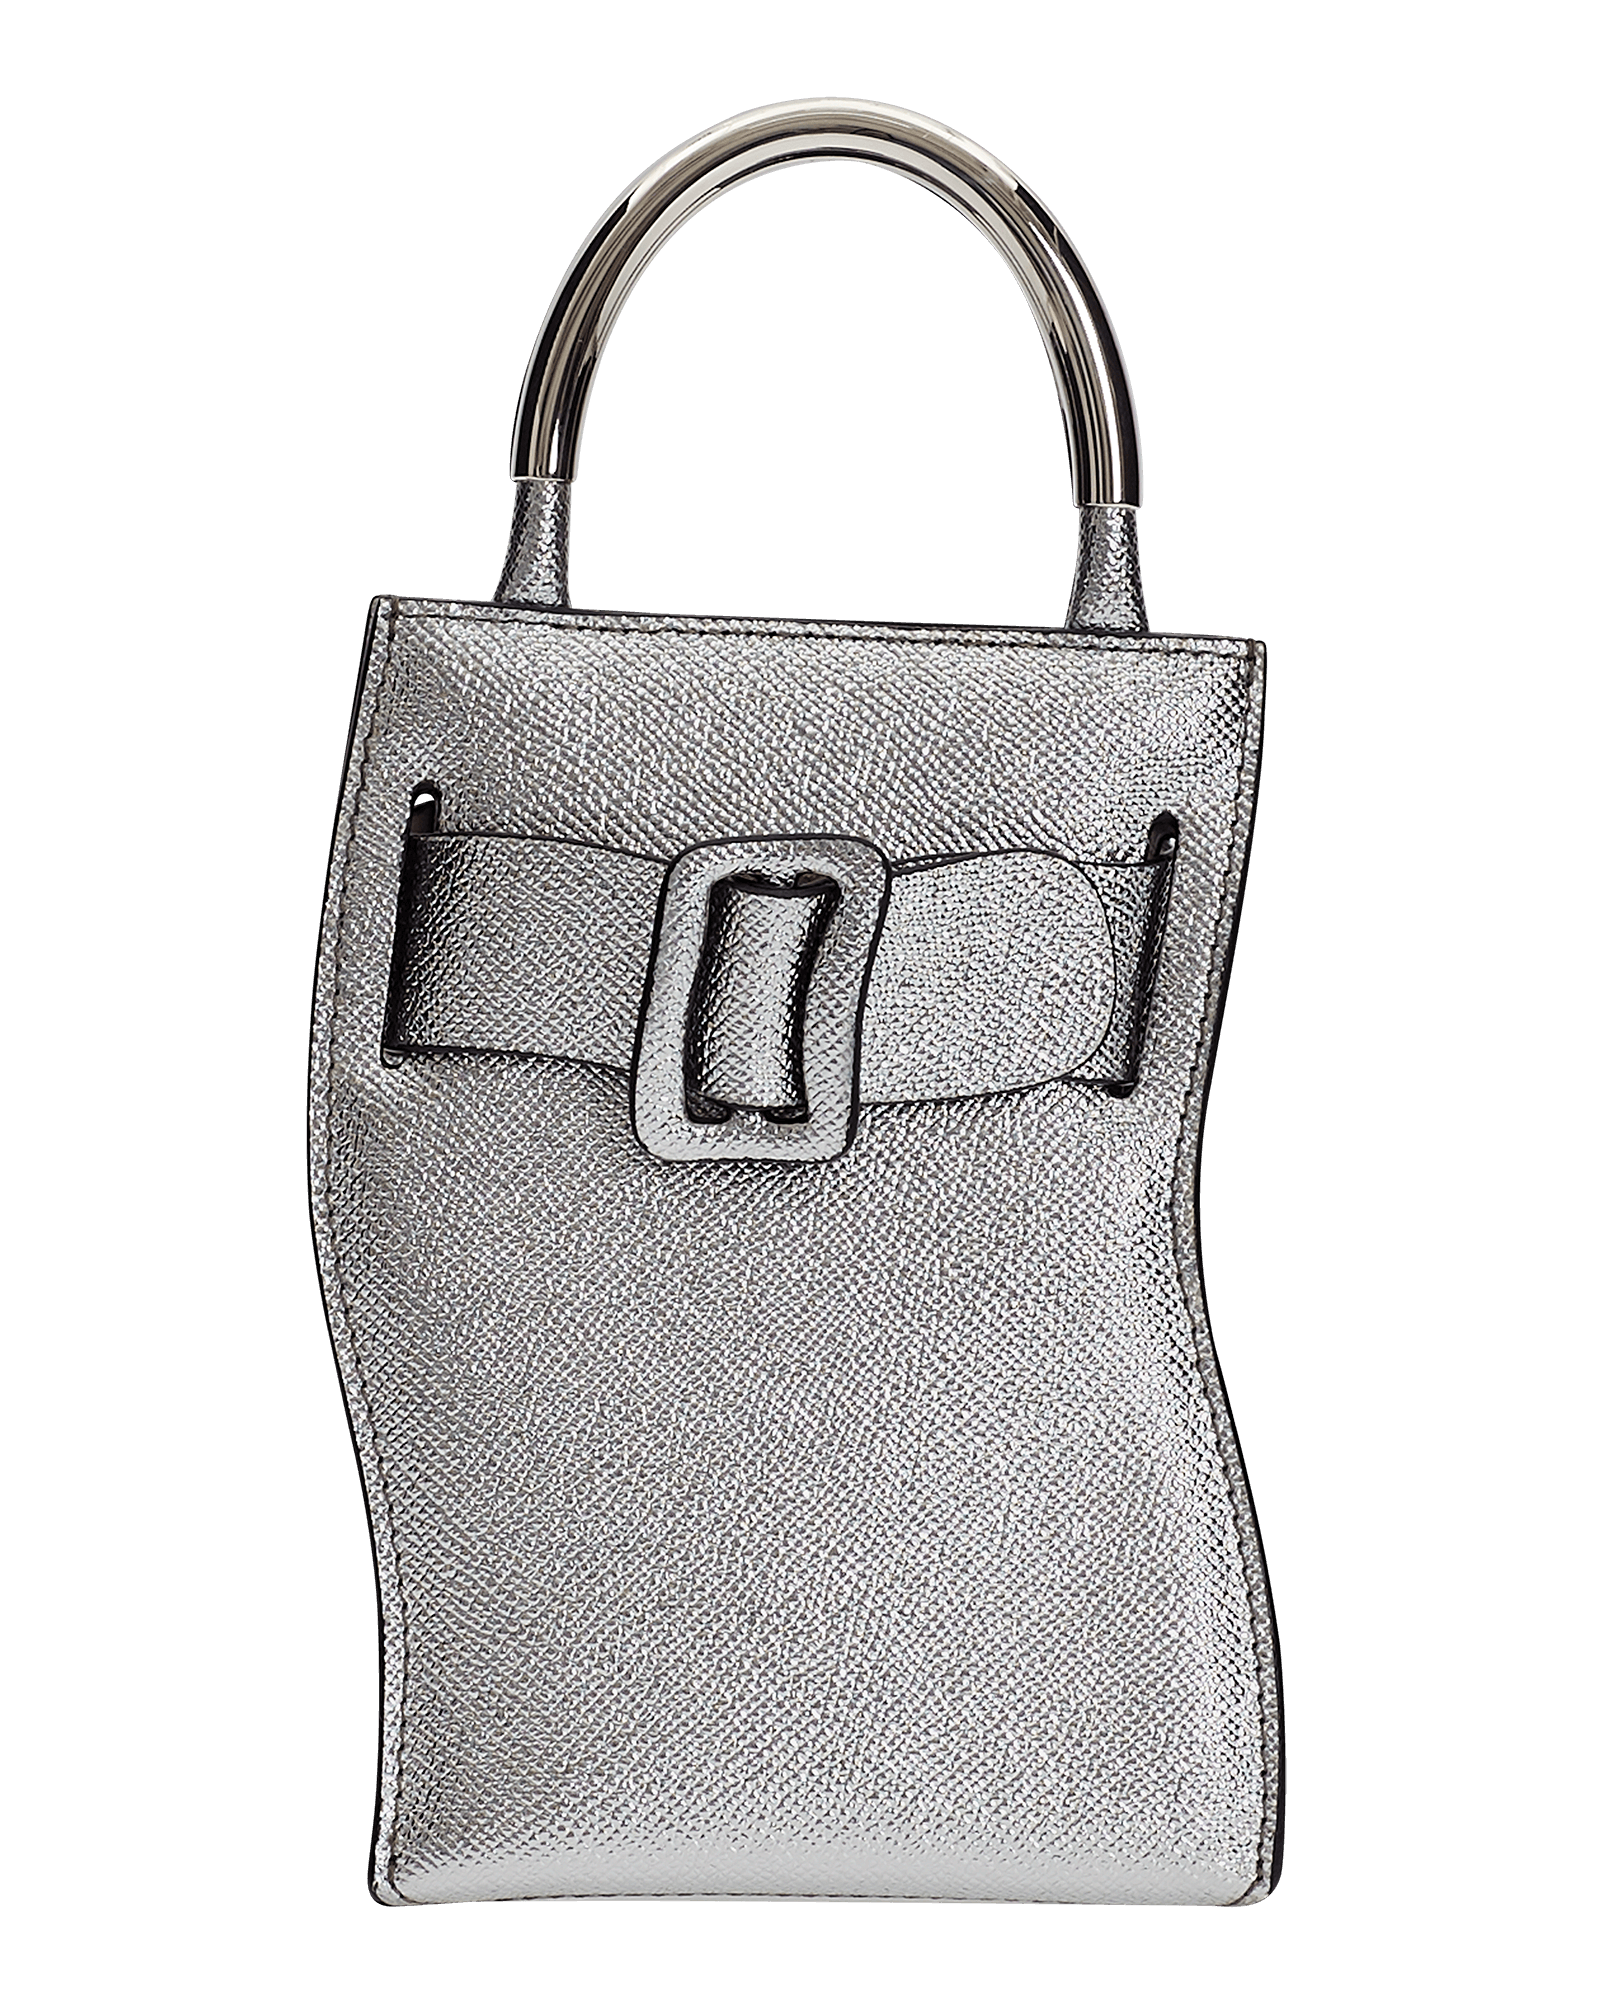 Elongated, small structured handbag with a silver buckle on the front, carry strap, and twin handles. Made with grained calfskin leather.